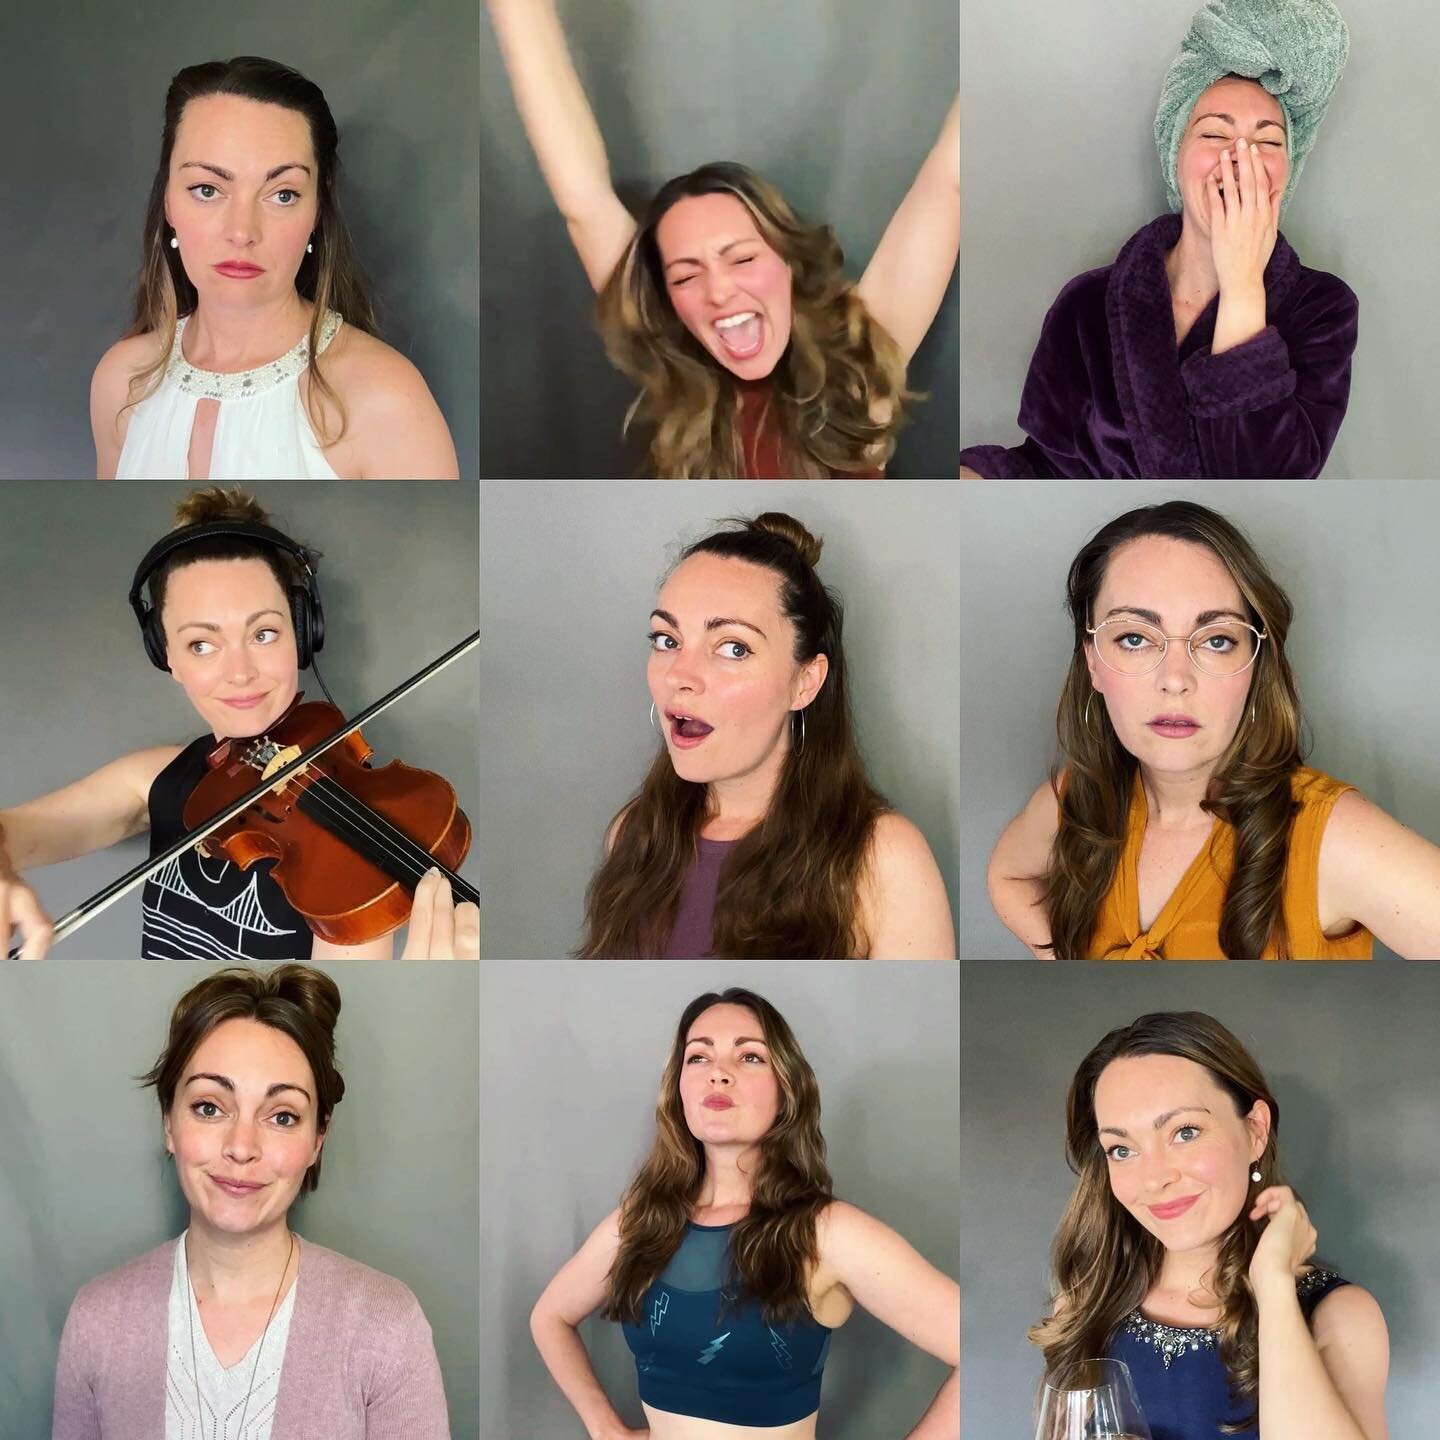 🎬 Self Tape Round-up 🎬 So much of an actor&rsquo;s work is behind-the-scenes with all the prep work and audition videos. The shiny final projects get shown, but the DIY work and the outtakes sometimes never see the light of day. Here&rsquo;s to all